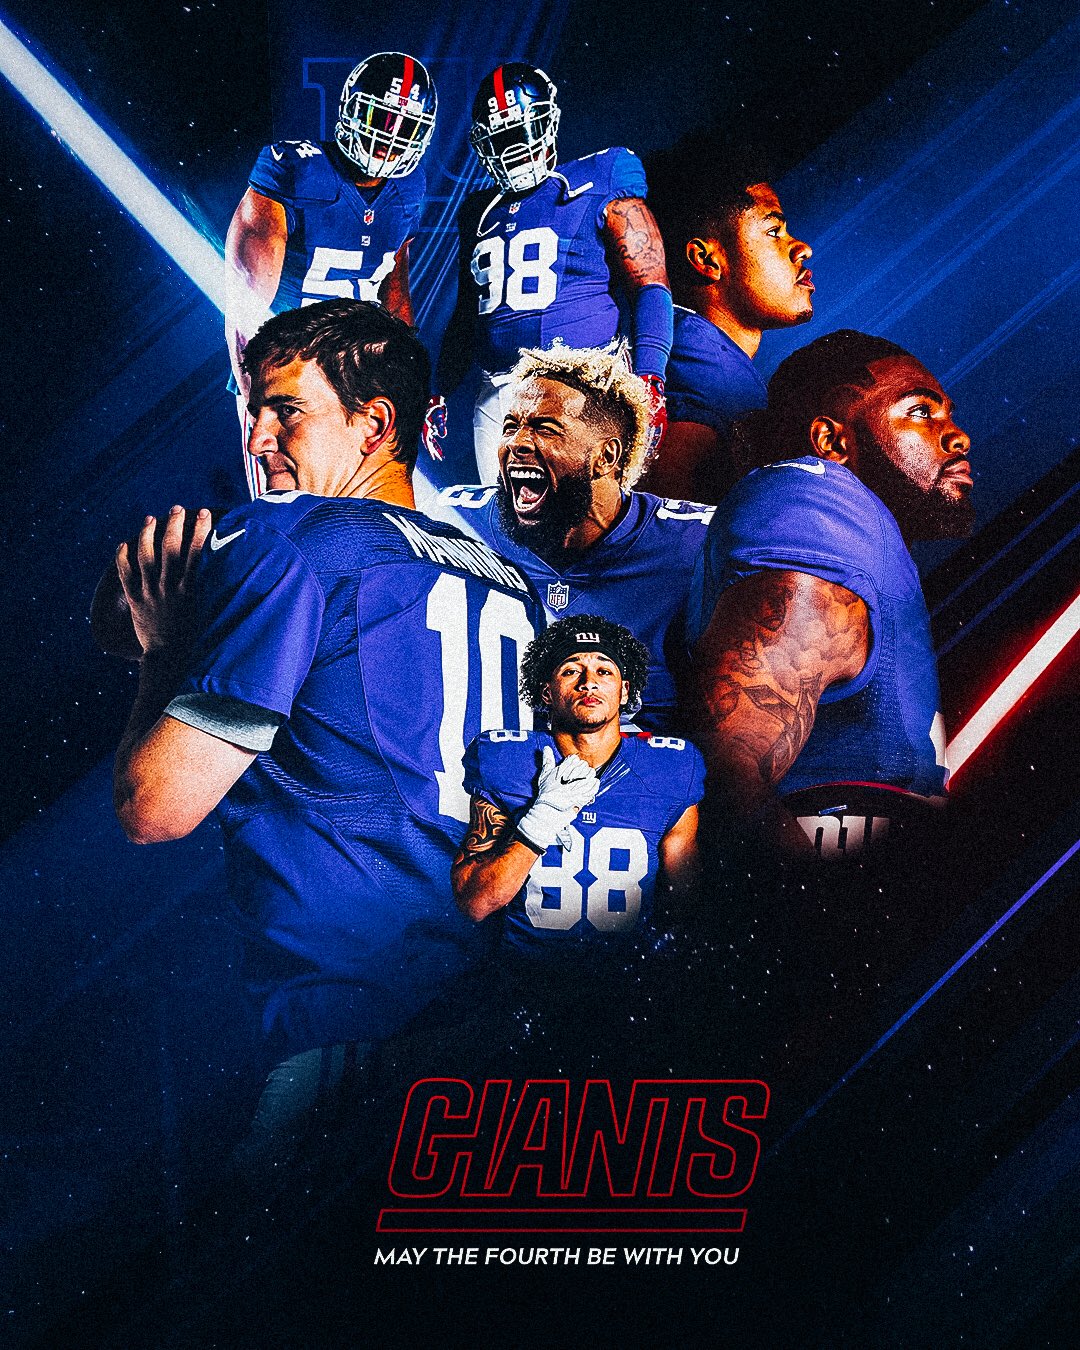 New York Giants on X: 𝕄𝕒𝕪 𝕥𝕙𝕖 𝔽𝕠𝕣𝕔𝕖 𝕓𝕖 𝕨𝕚𝕥𝕙 𝔹𝕝𝕦𝕖  #MayThe4thBeWithYou  / X